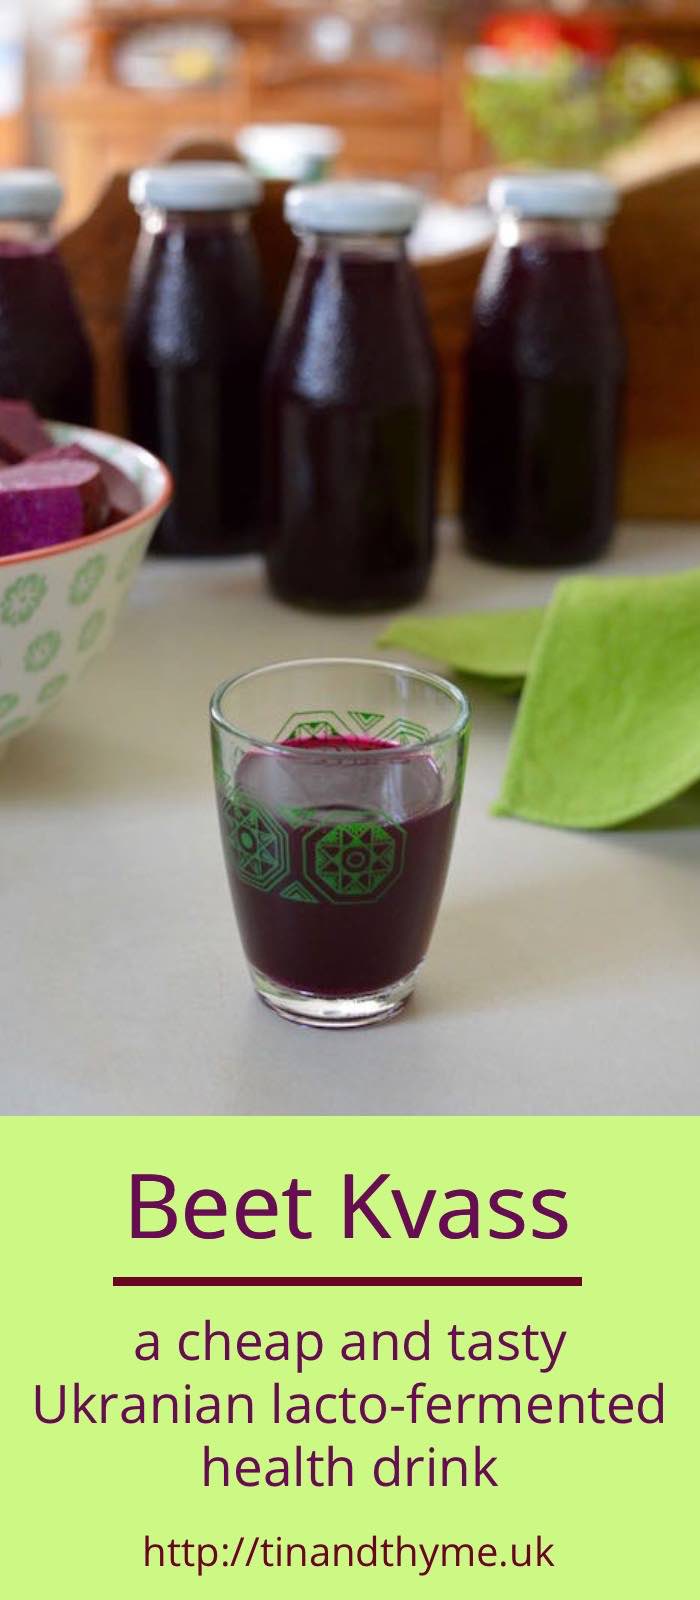 A glass of homemade beet kvass with several bottles of it in the background.